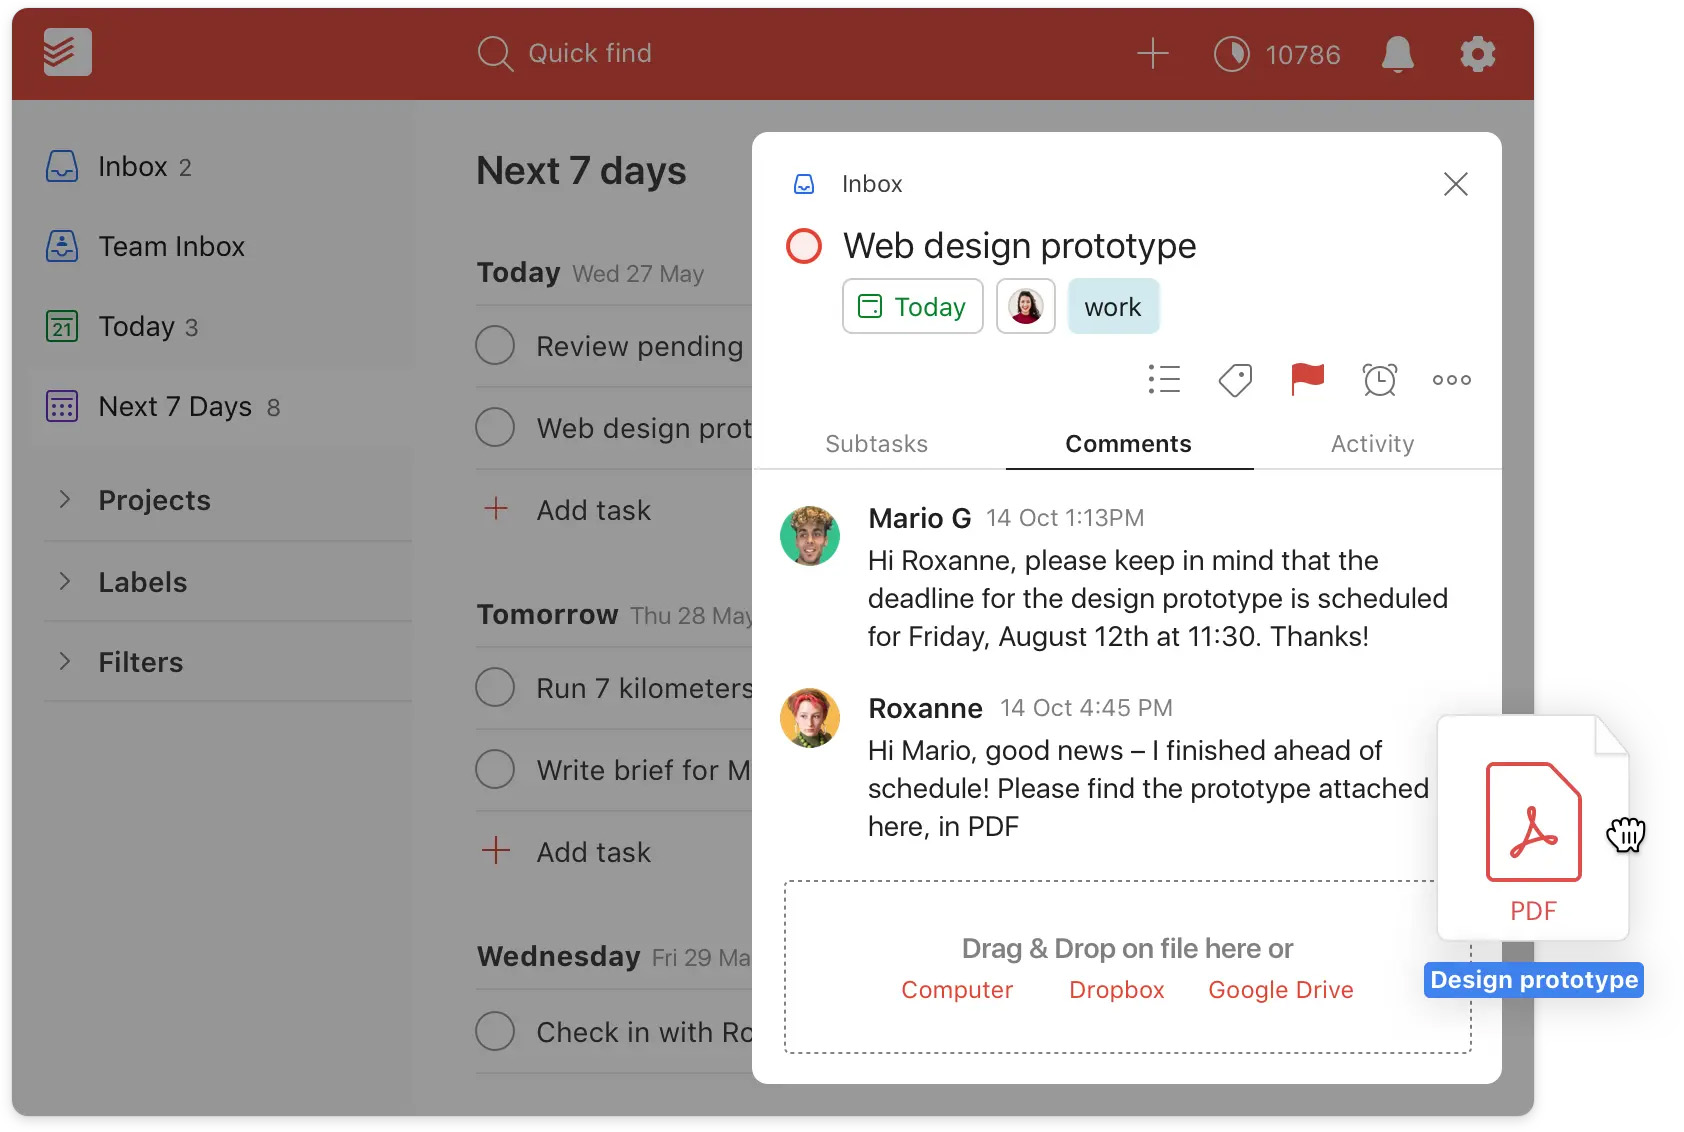 Sample image of the Todoist app being used for business